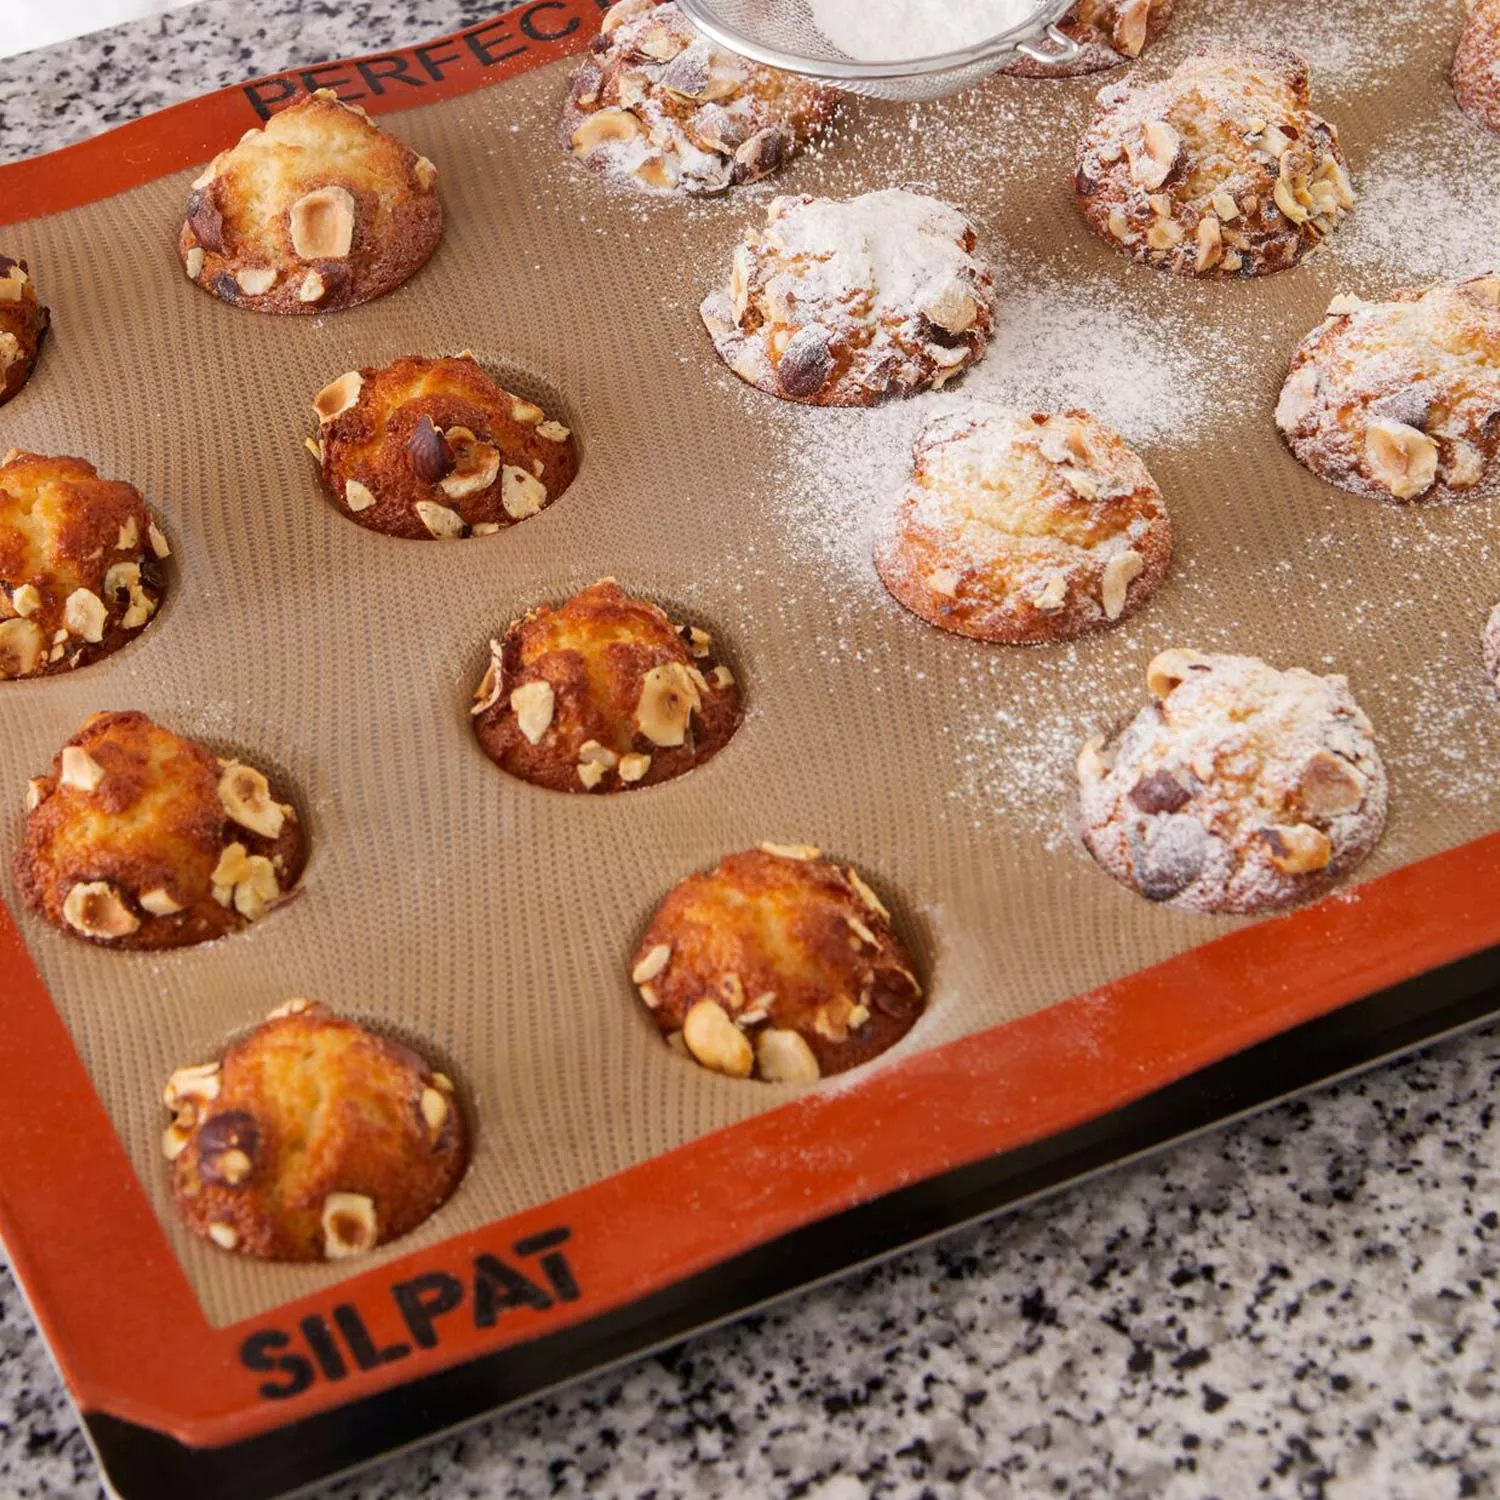 Moule muffins silicone Silpat